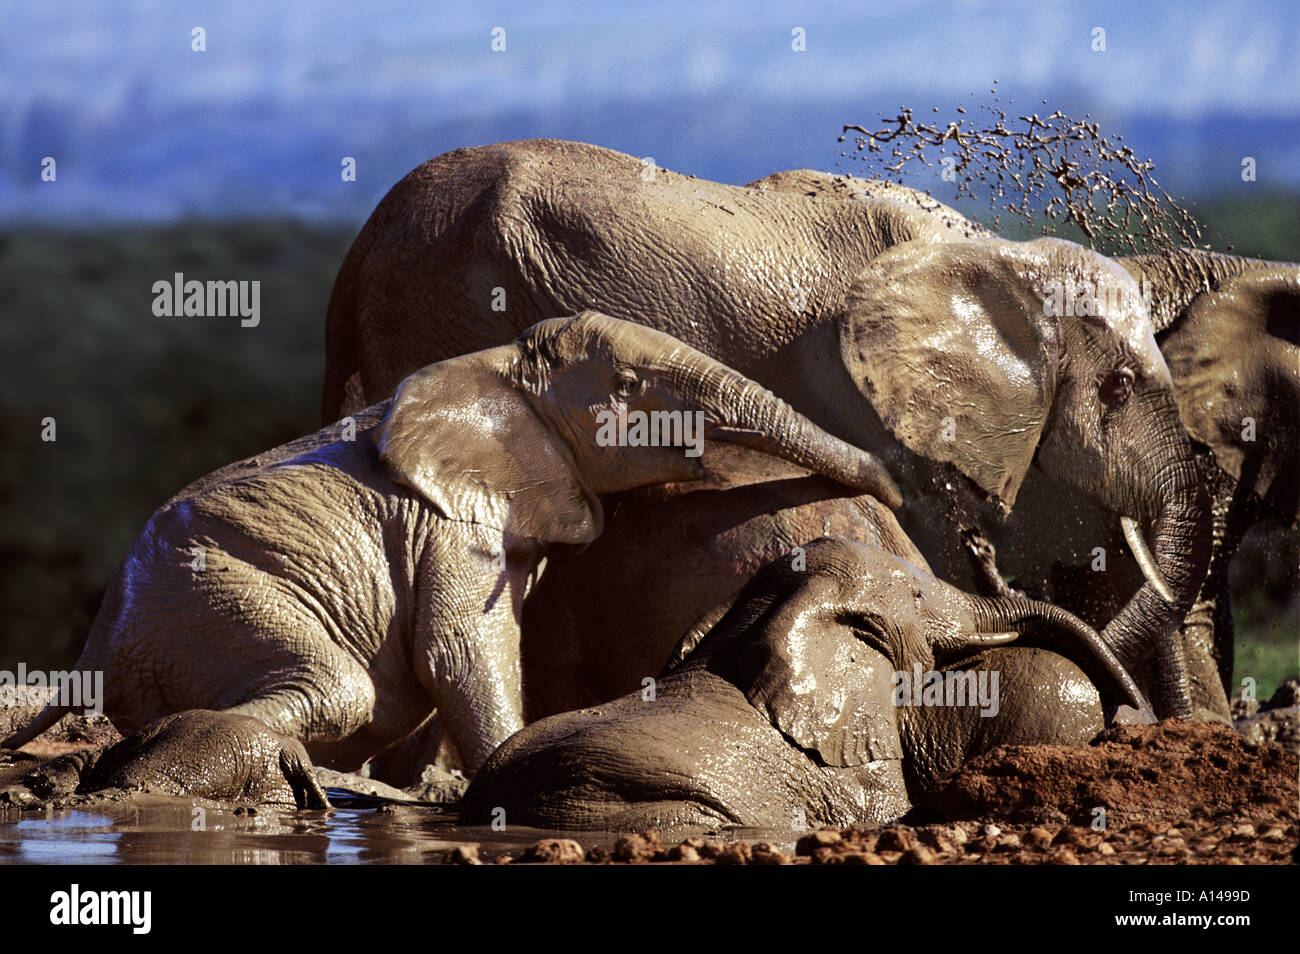 Elephants wallowing in mud Addo National Park South Africa Stock Photo